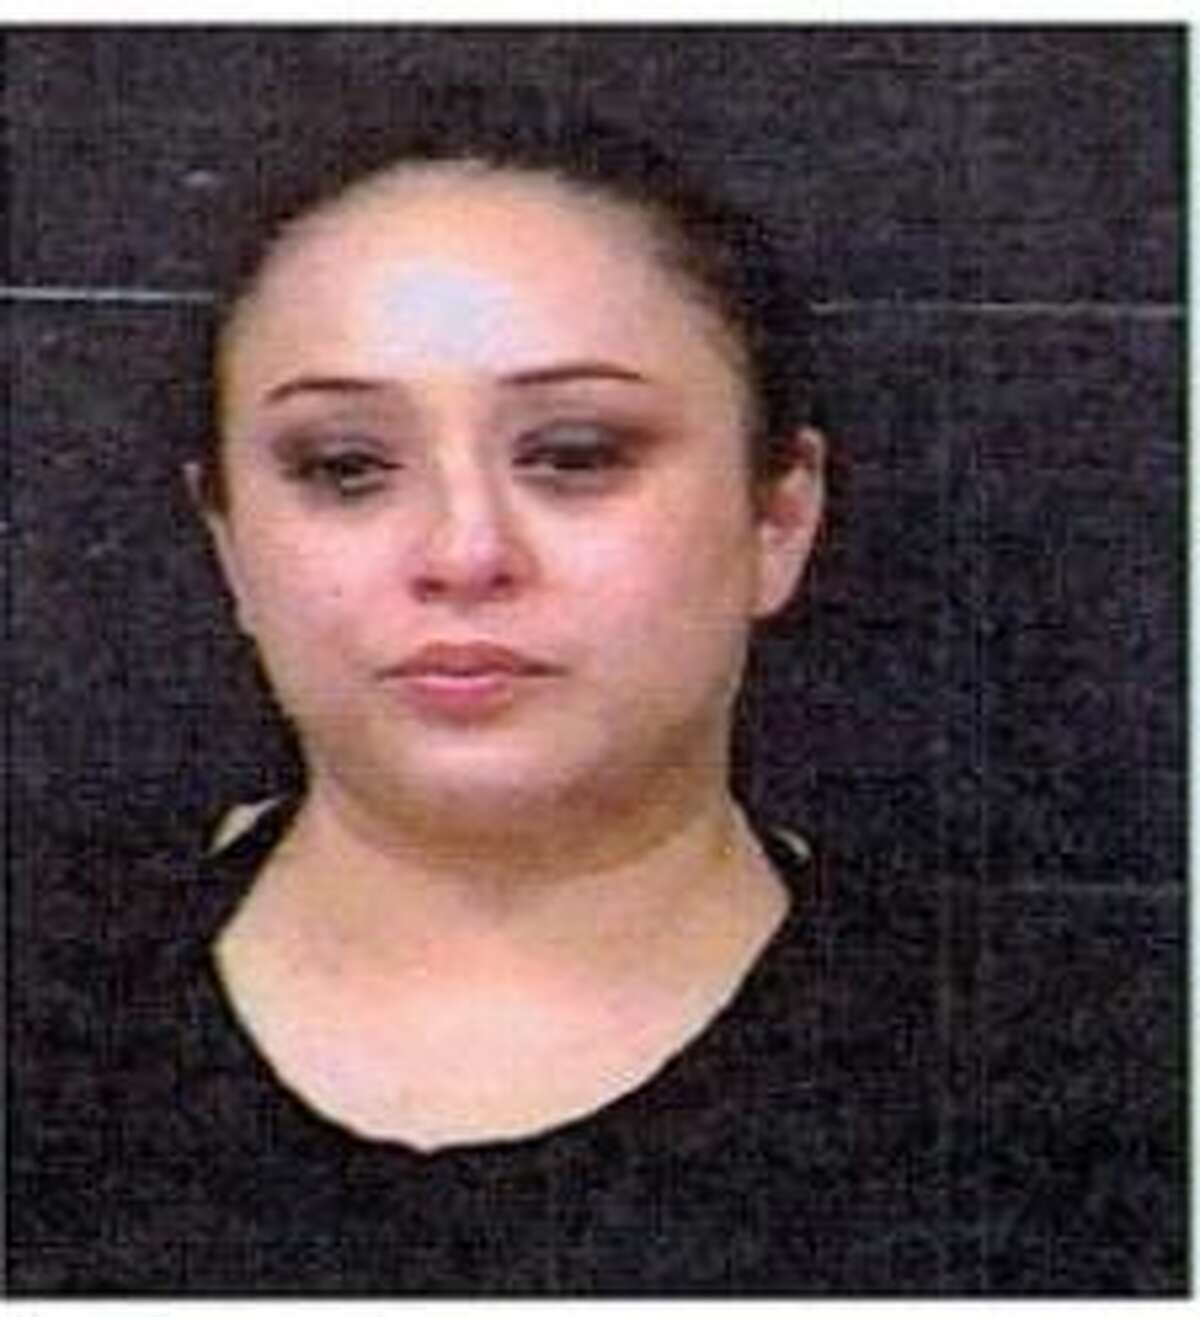 Claudia E Leal was charged with driving while intoxicated with a child under 15 years of age.